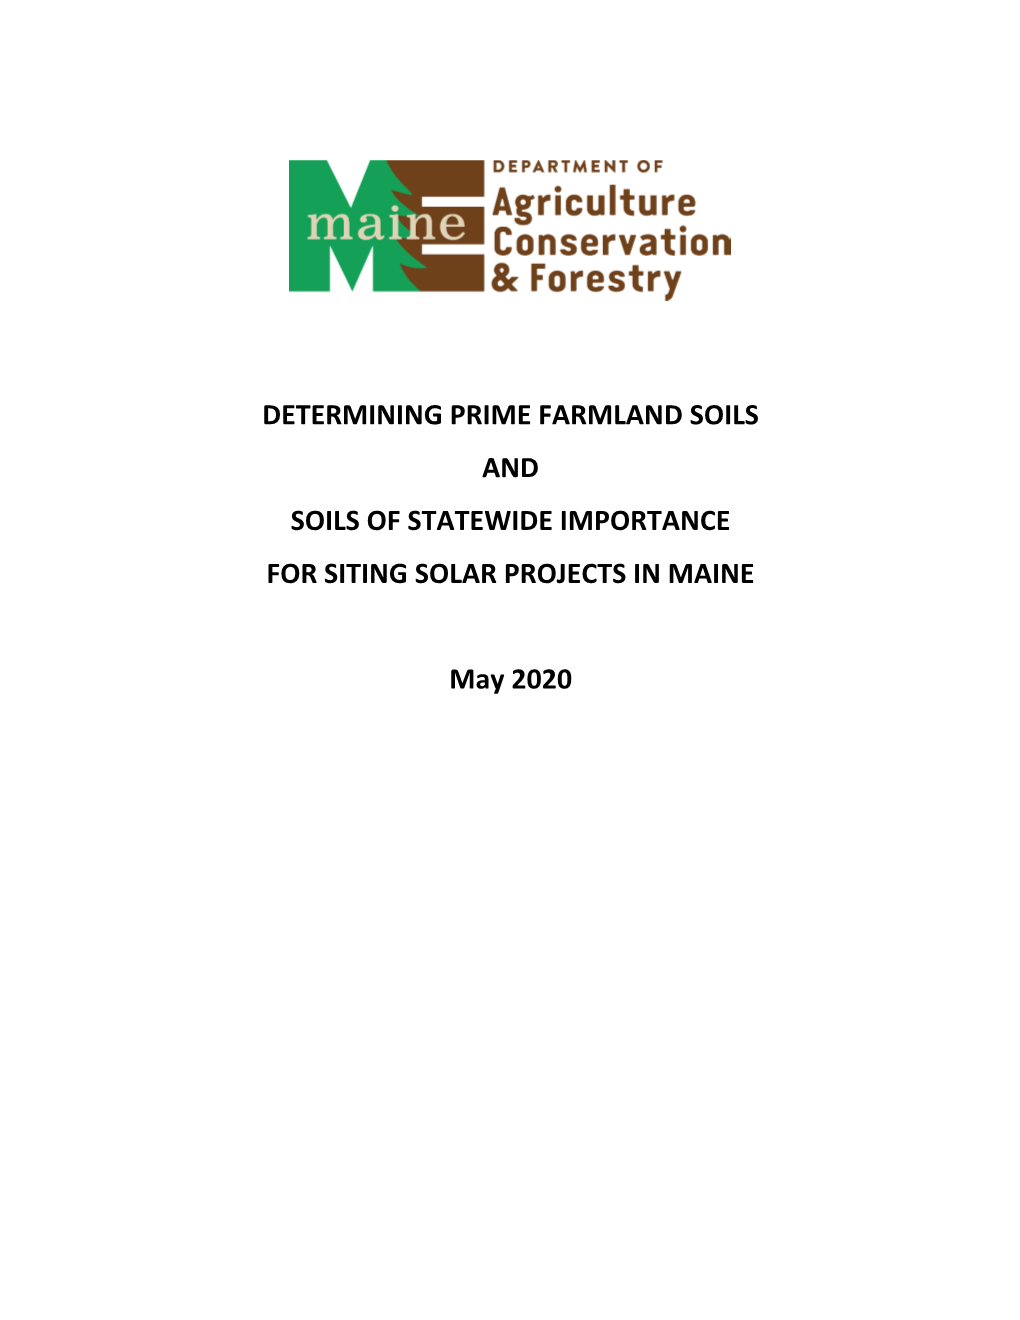 DACF Guide to Determining Prime Farmland Soils and Soils Of